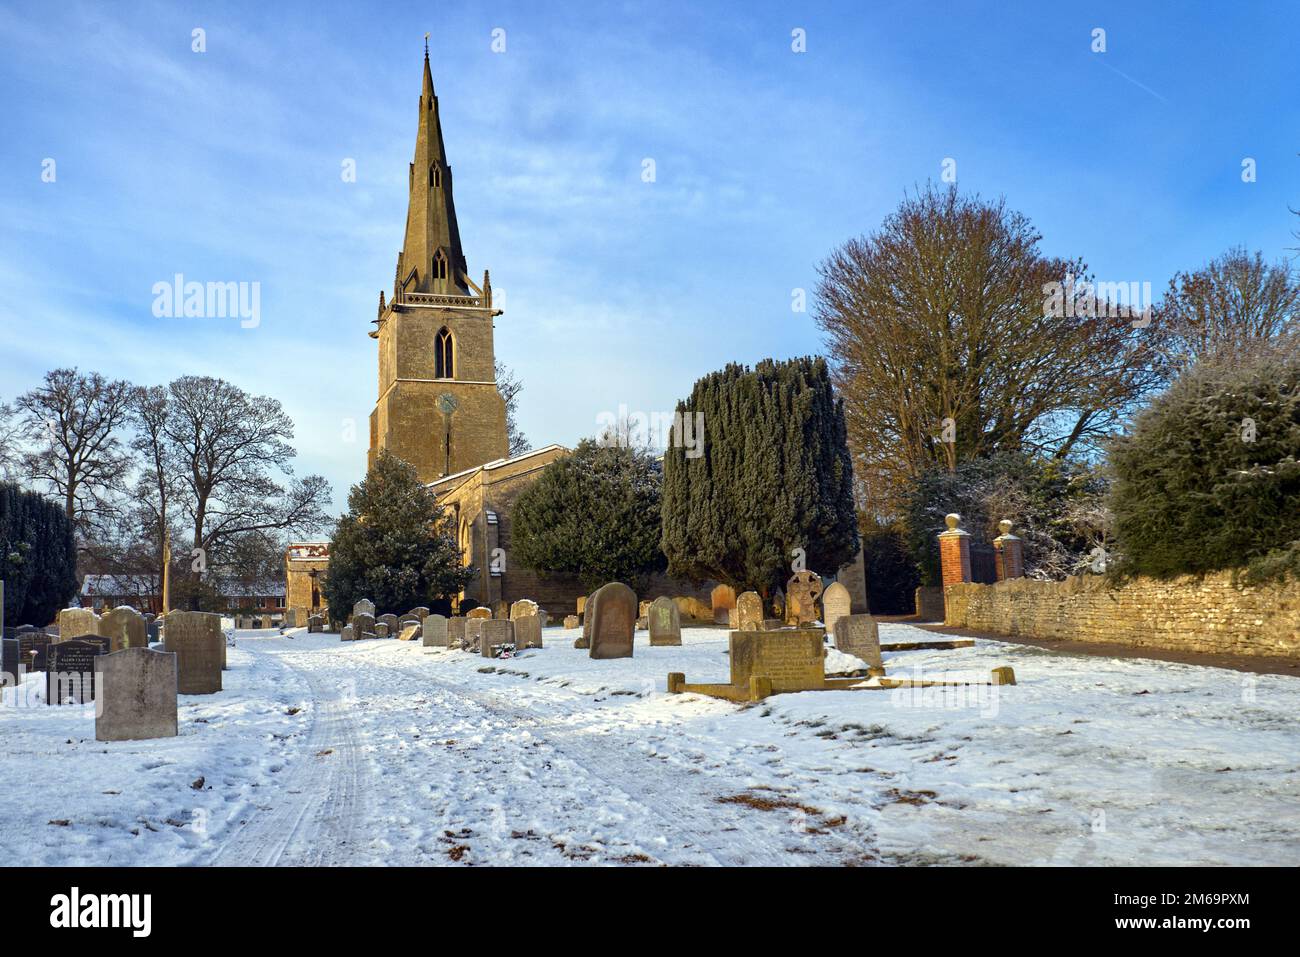 Bedfordshire, England, UK - St Peter's Church and churchyard in Sharnbrook village after winter snow Stock Photo